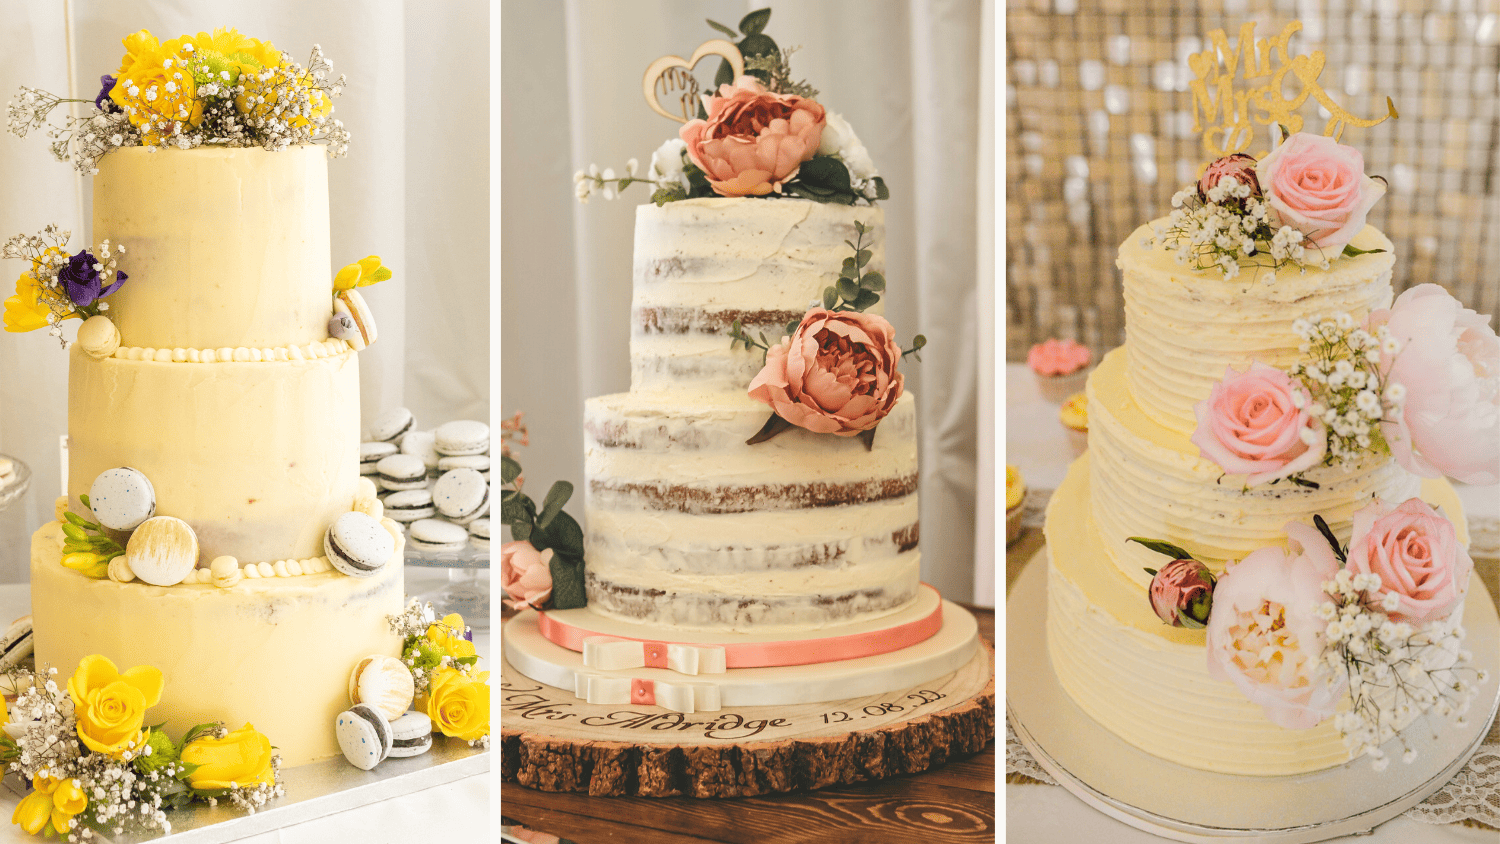 All the top tips and guidance for creating your perfect wedding cake!